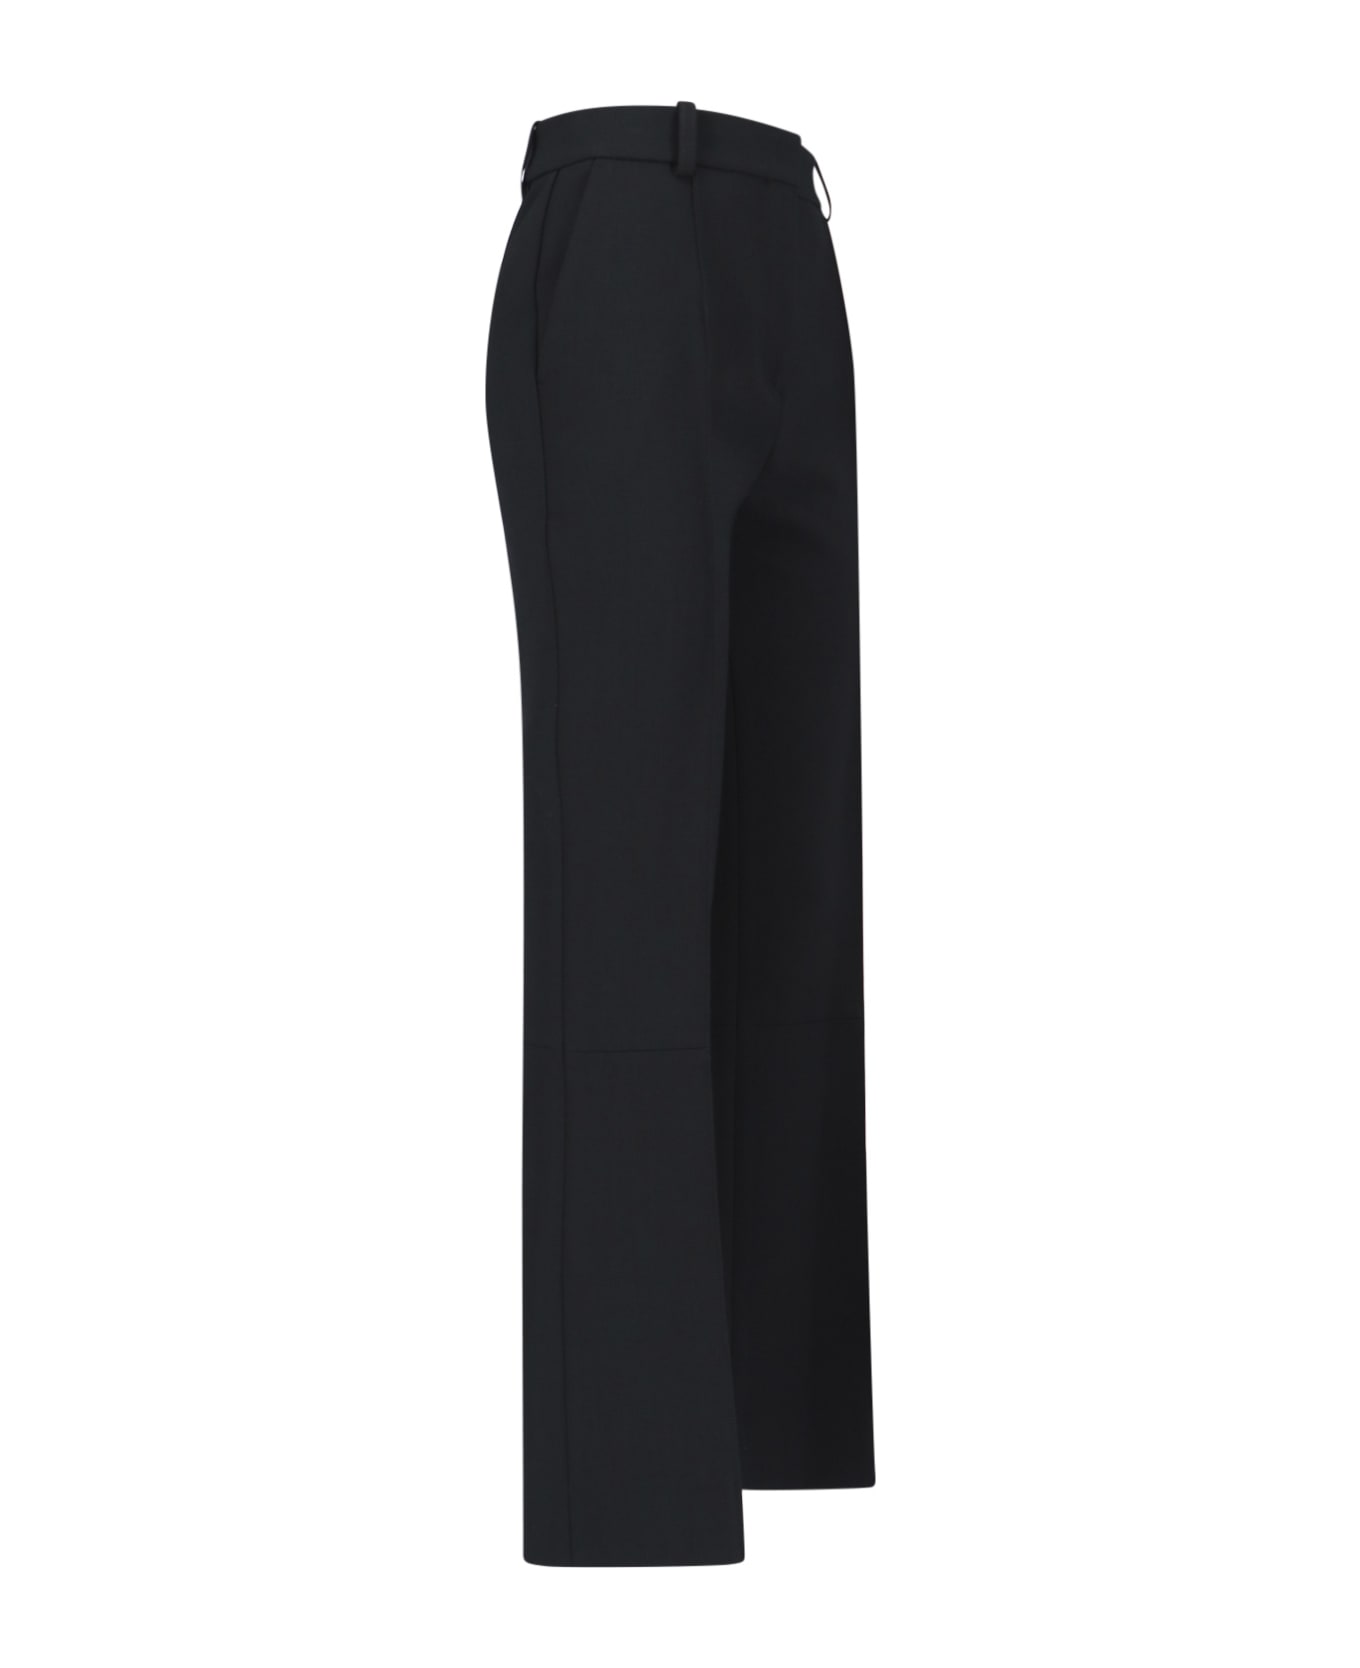 Victoria Beckham Tailored Trousers - Black  